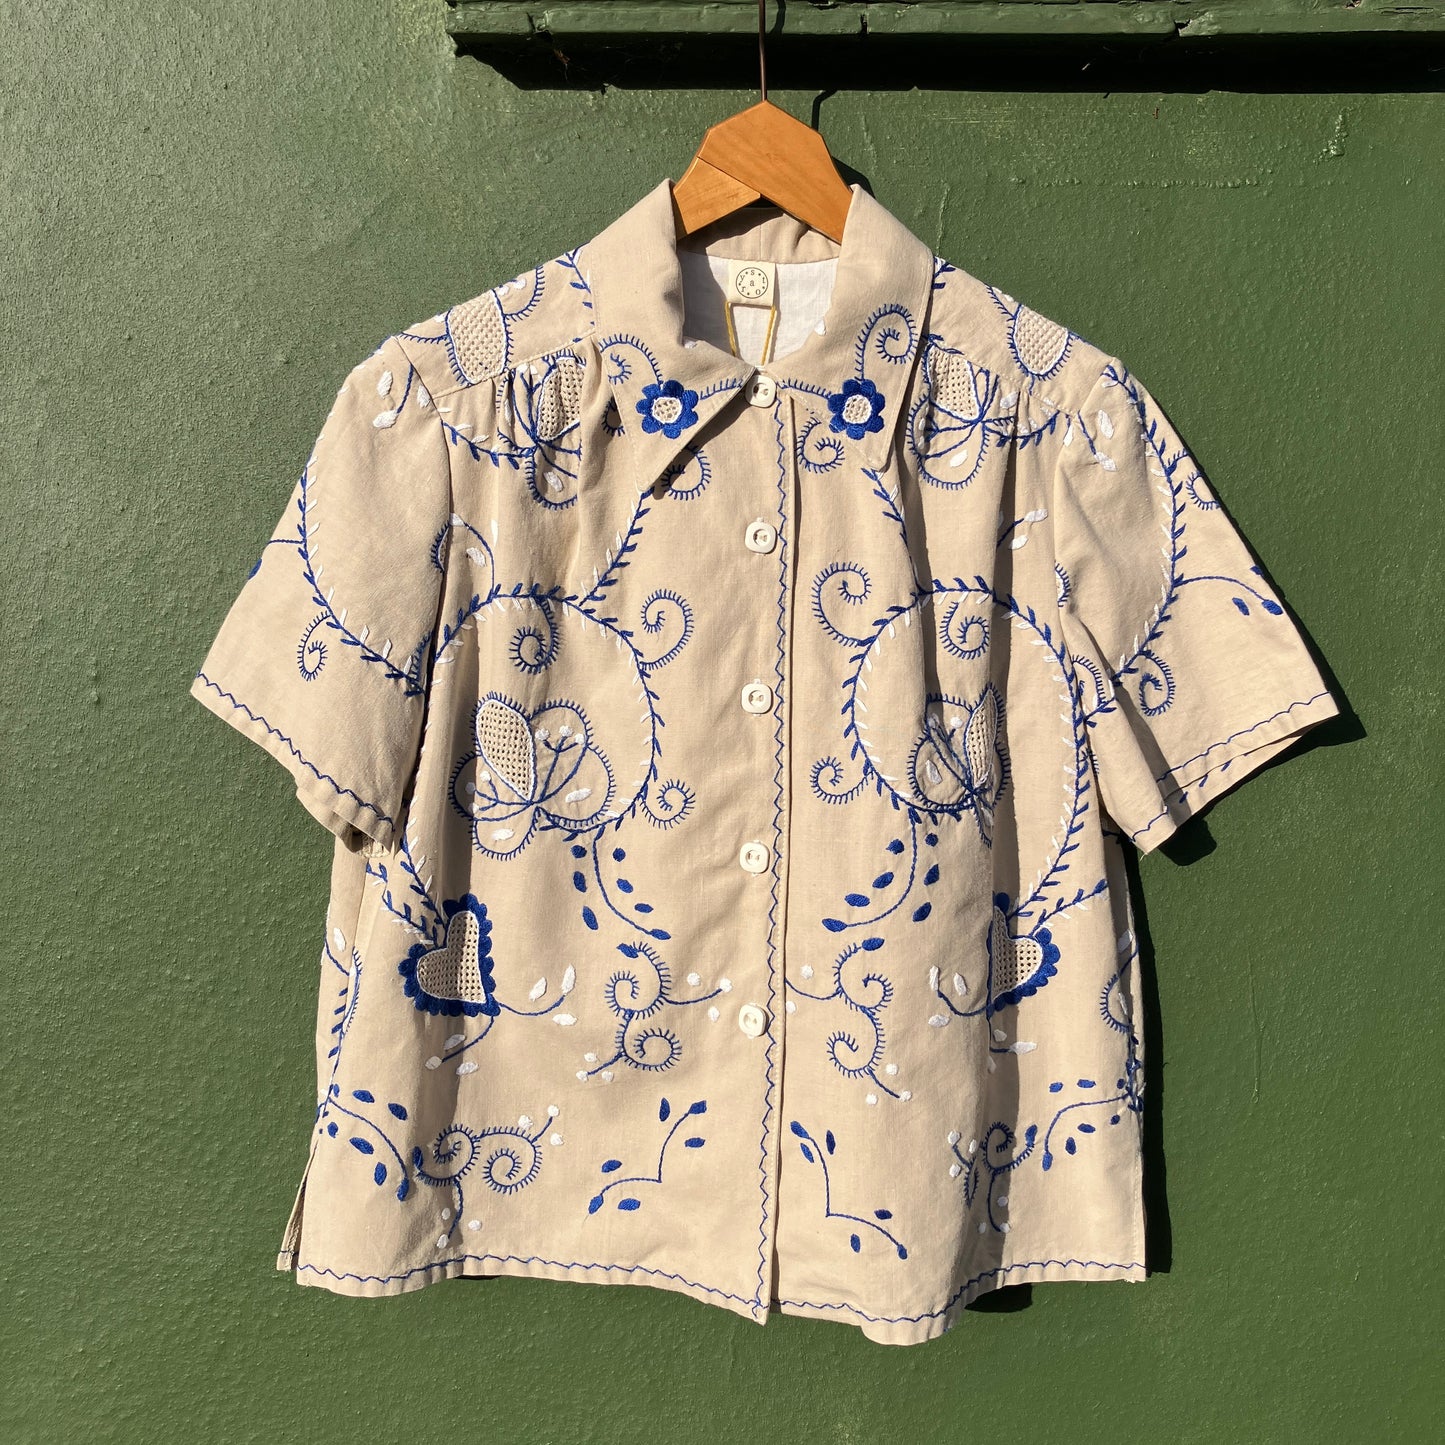 shirt hand made from a recycled embroidered tablecloth